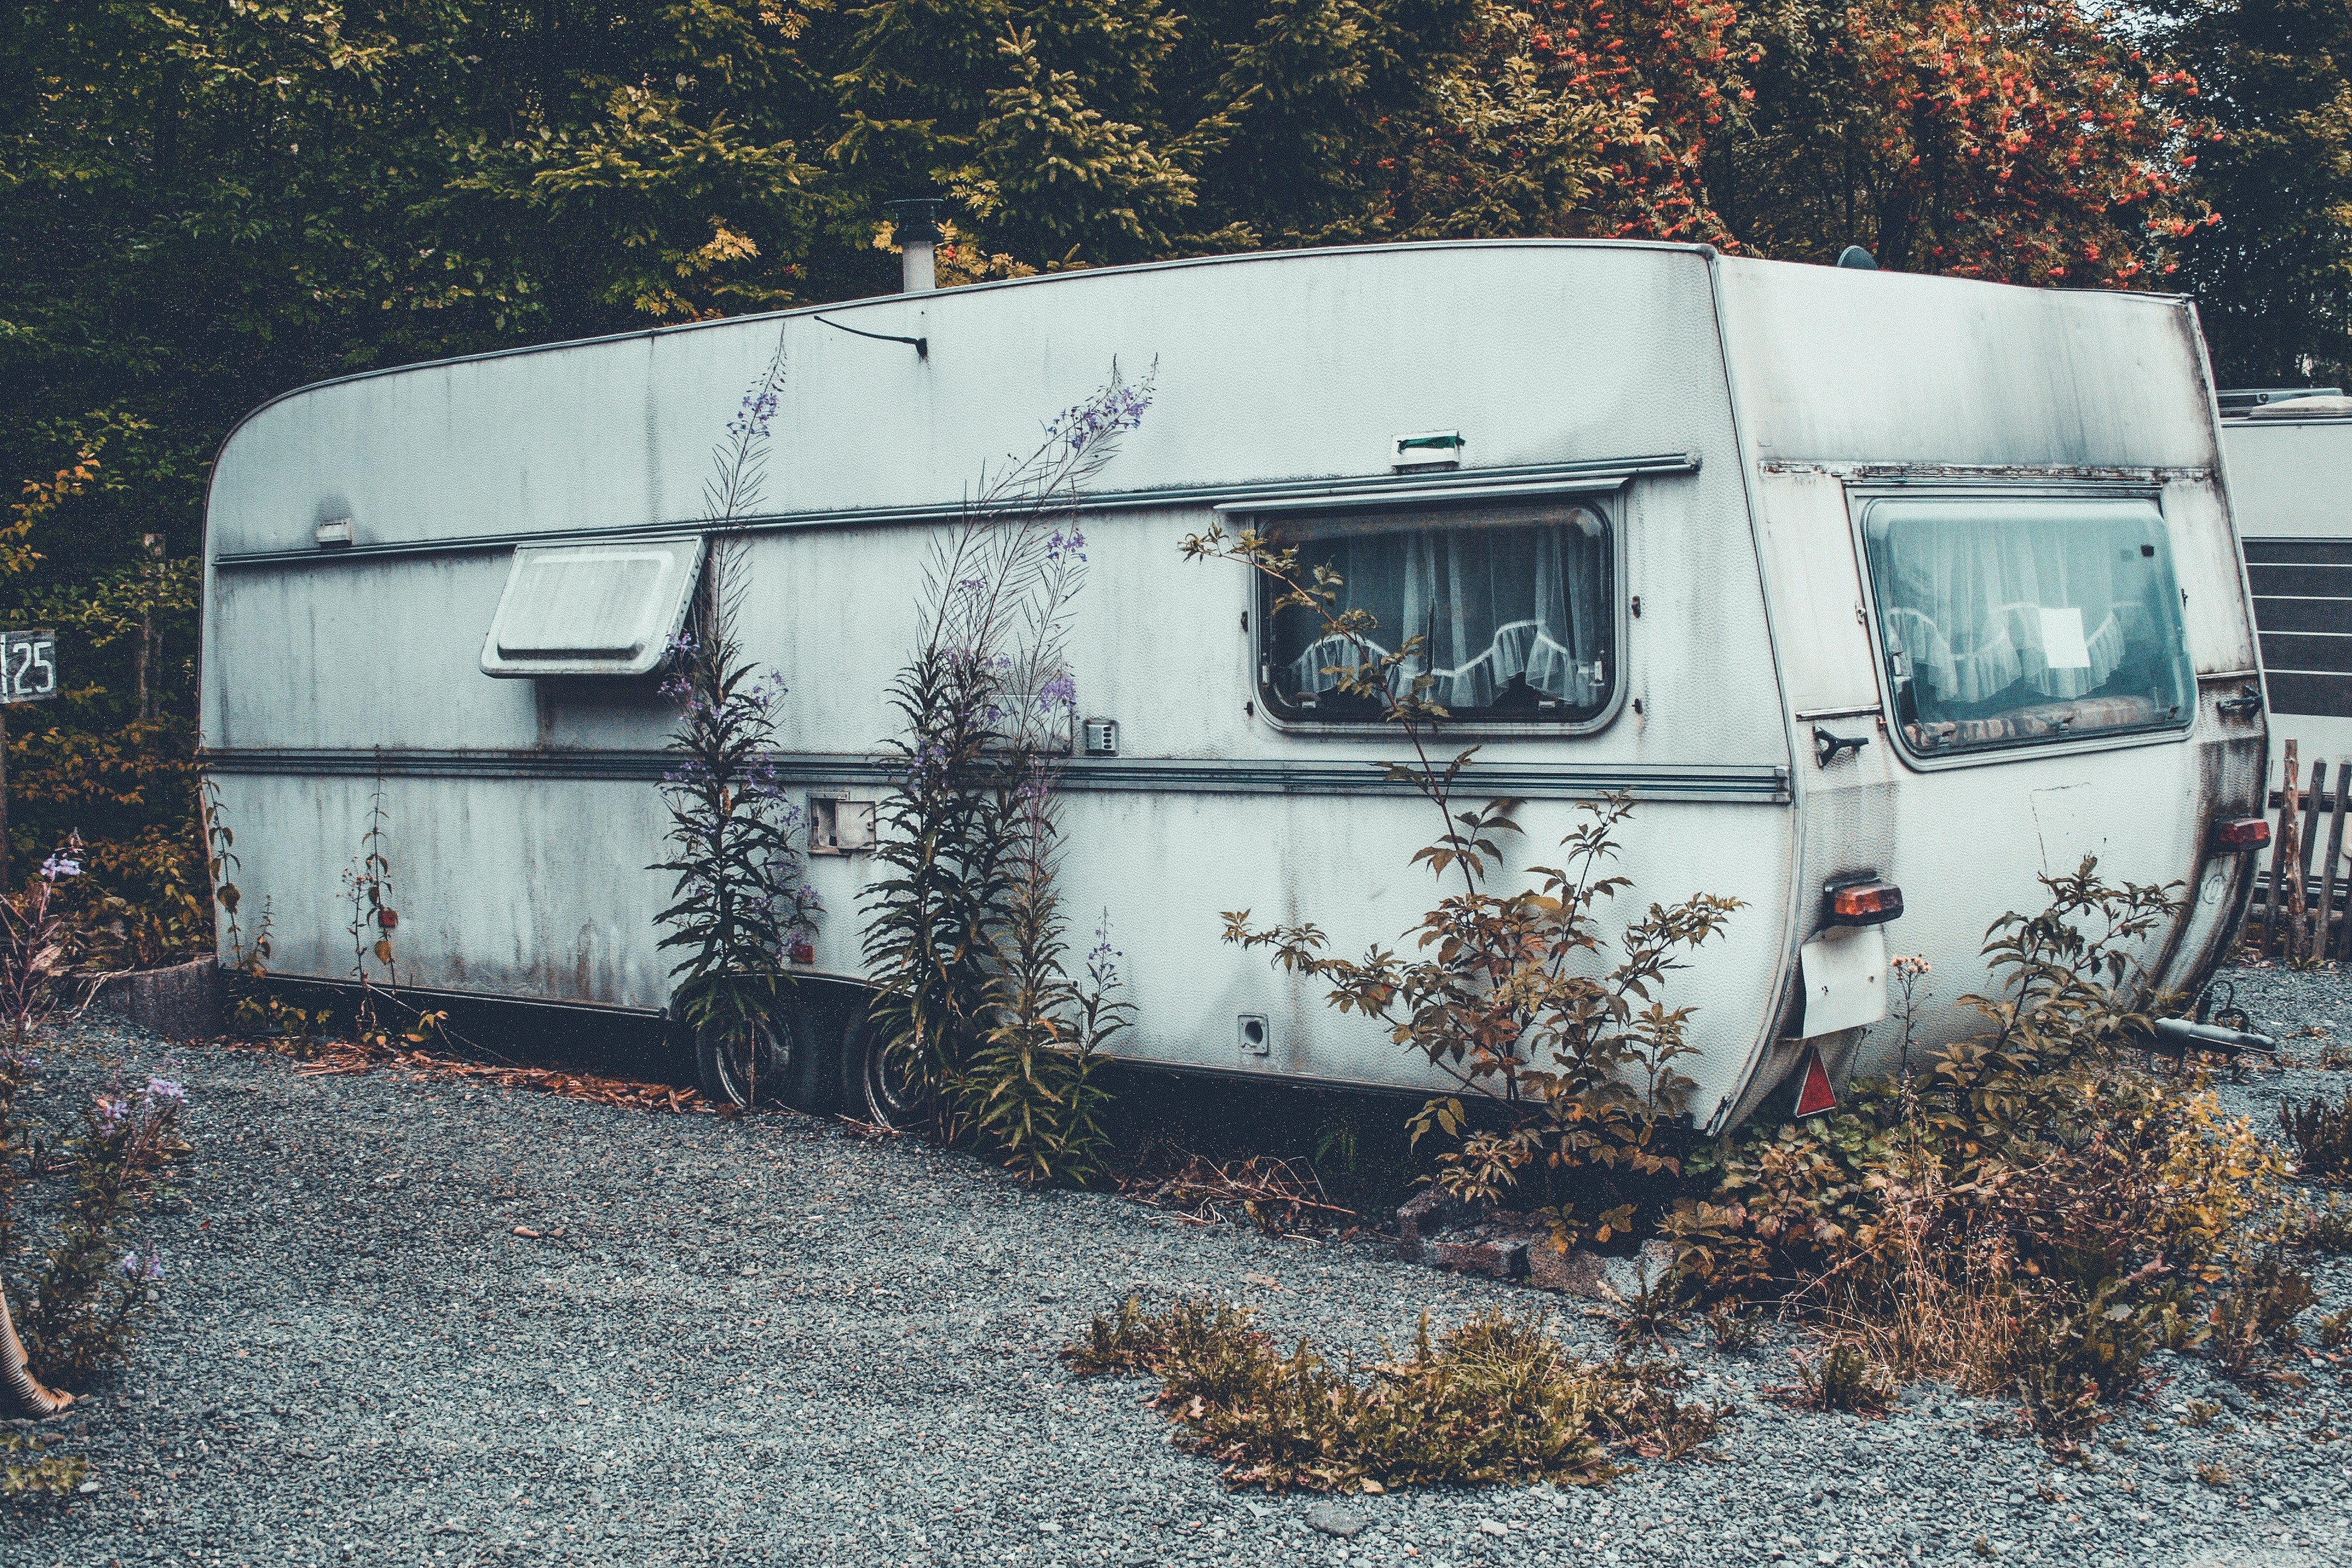 Polly followed the children until they stopped at an old trailer. | Source: Unsplash